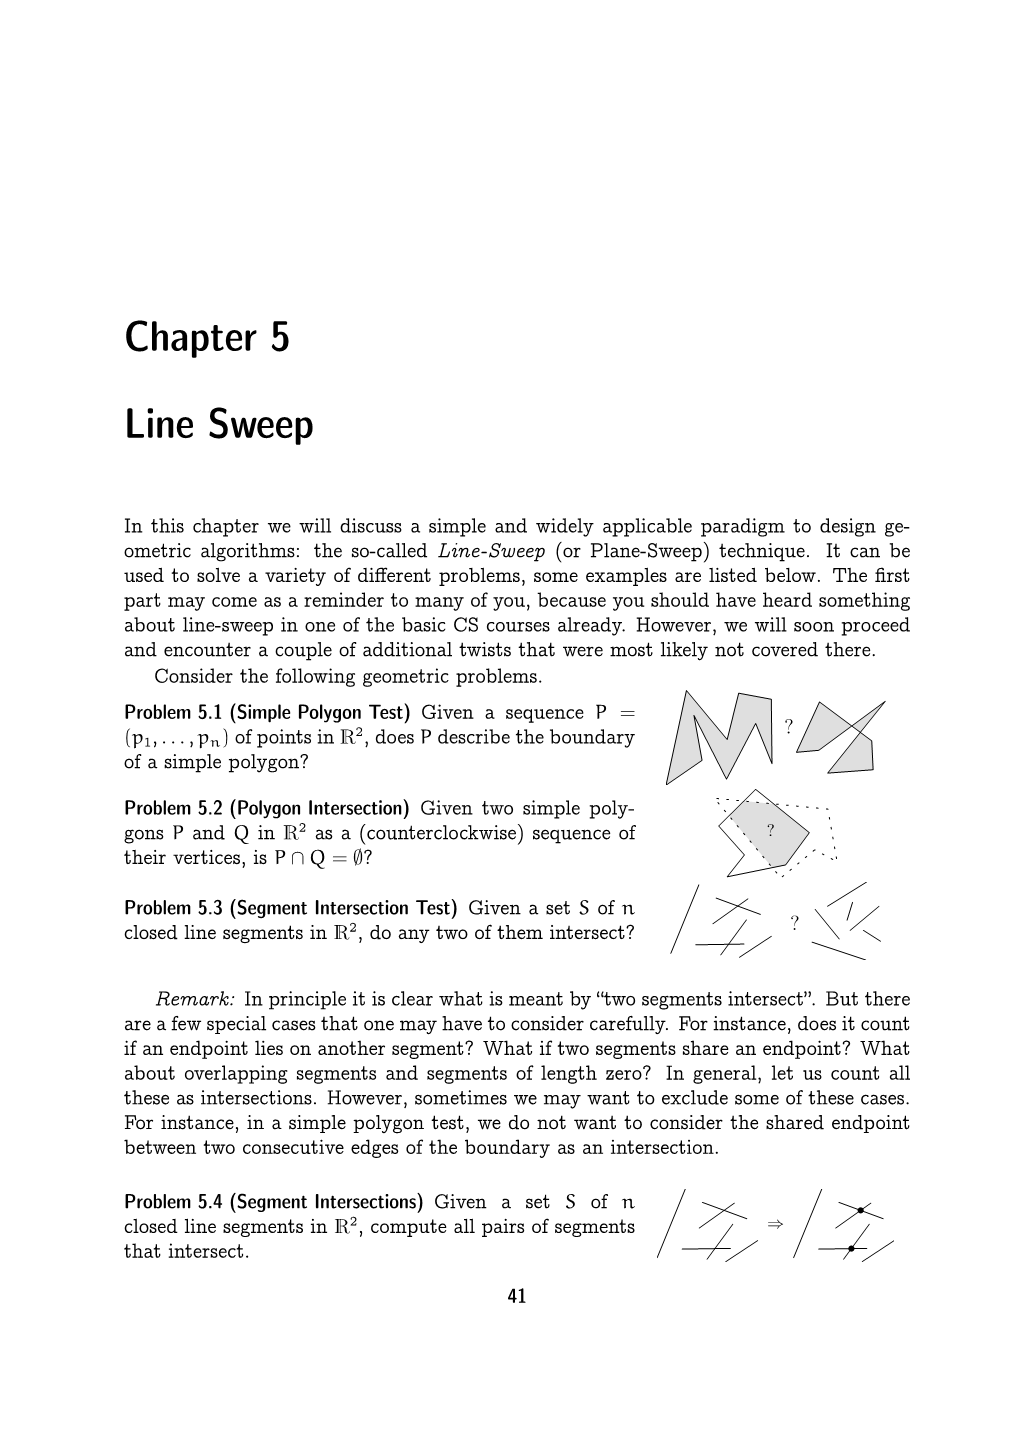 Chapter 5 Line Sweep